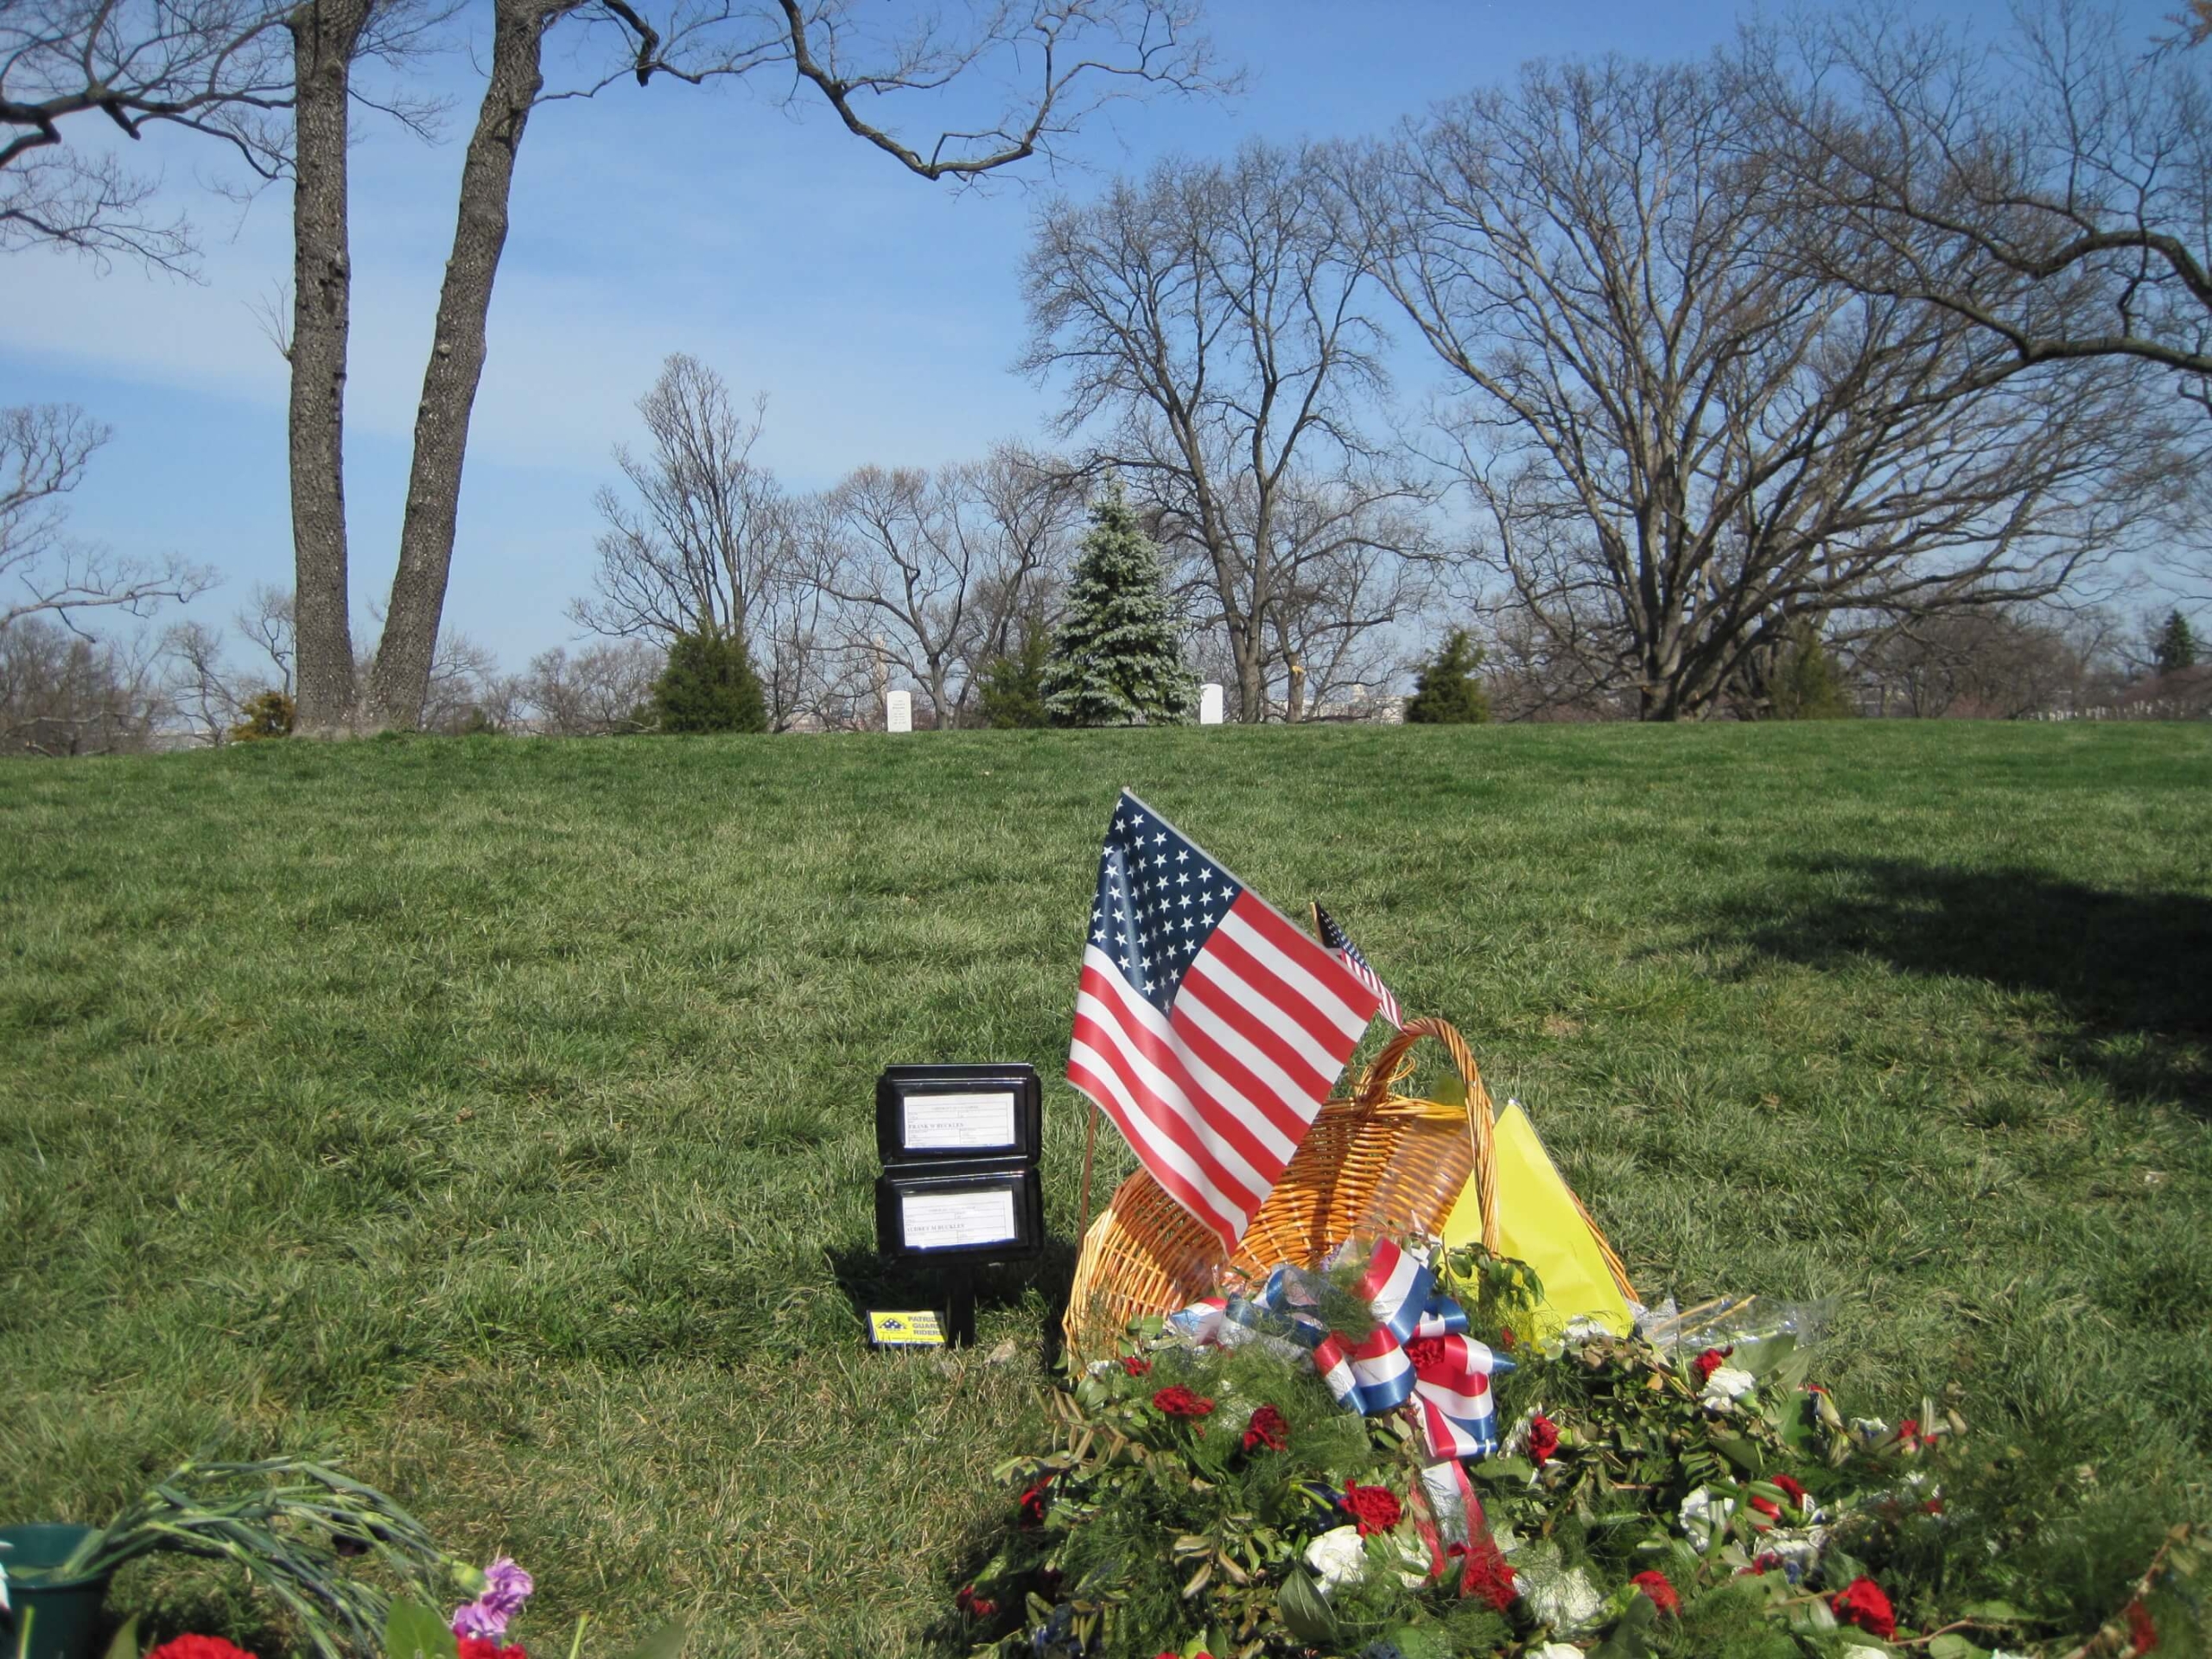 fwbuckles-gravesite-photo-by-eileen-horan-march-2011-001